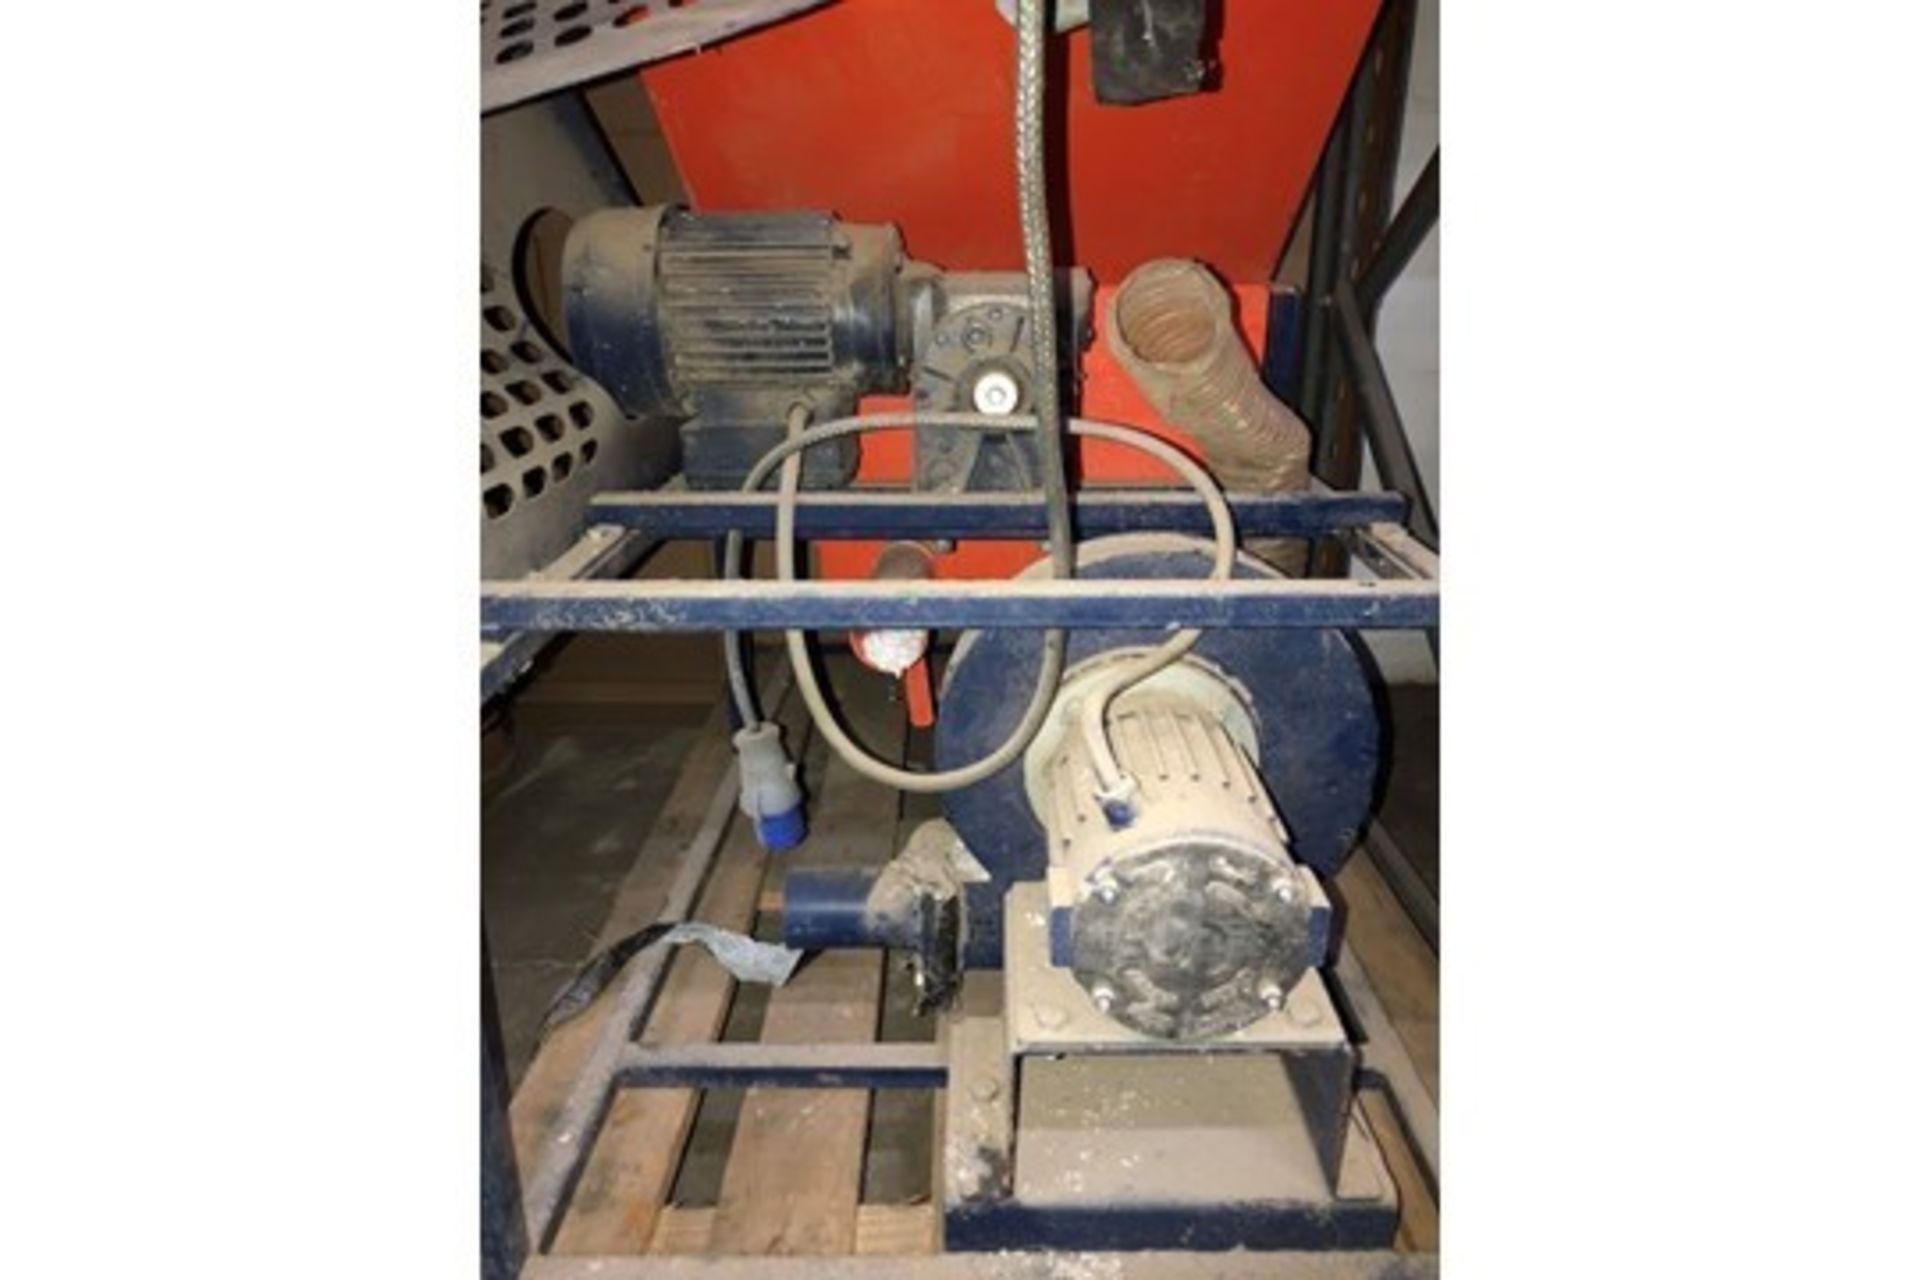 Instafibre Cavity Wall & Roof Insulation Blower Machine - Spares & Repairs - Image 3 of 4